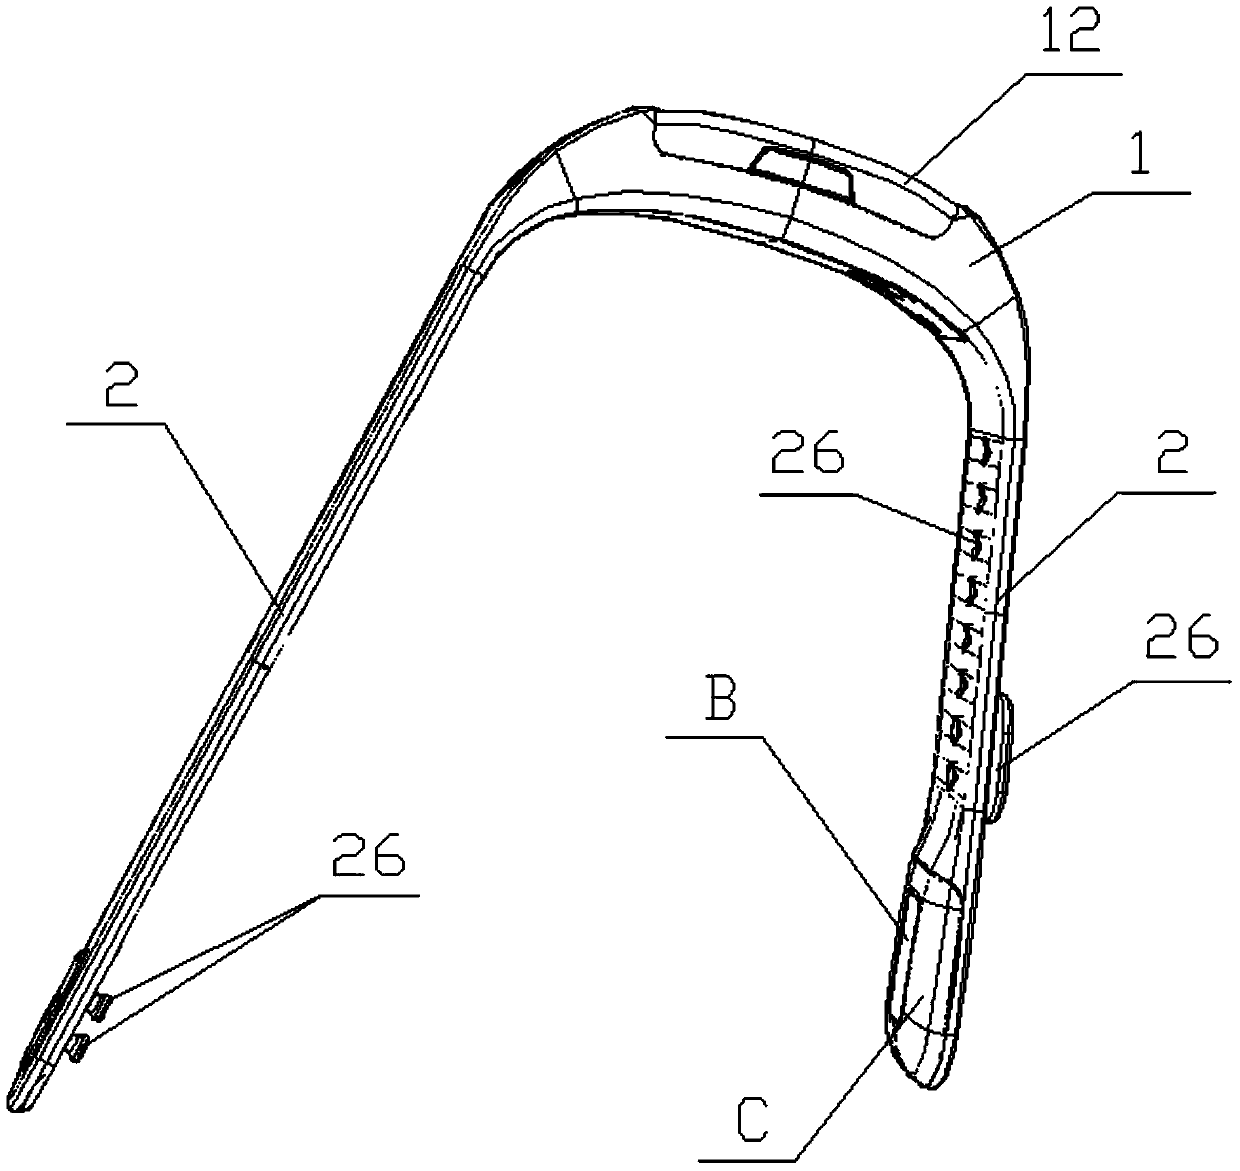 Bracelet capable of collecting multi-parameter health indexes